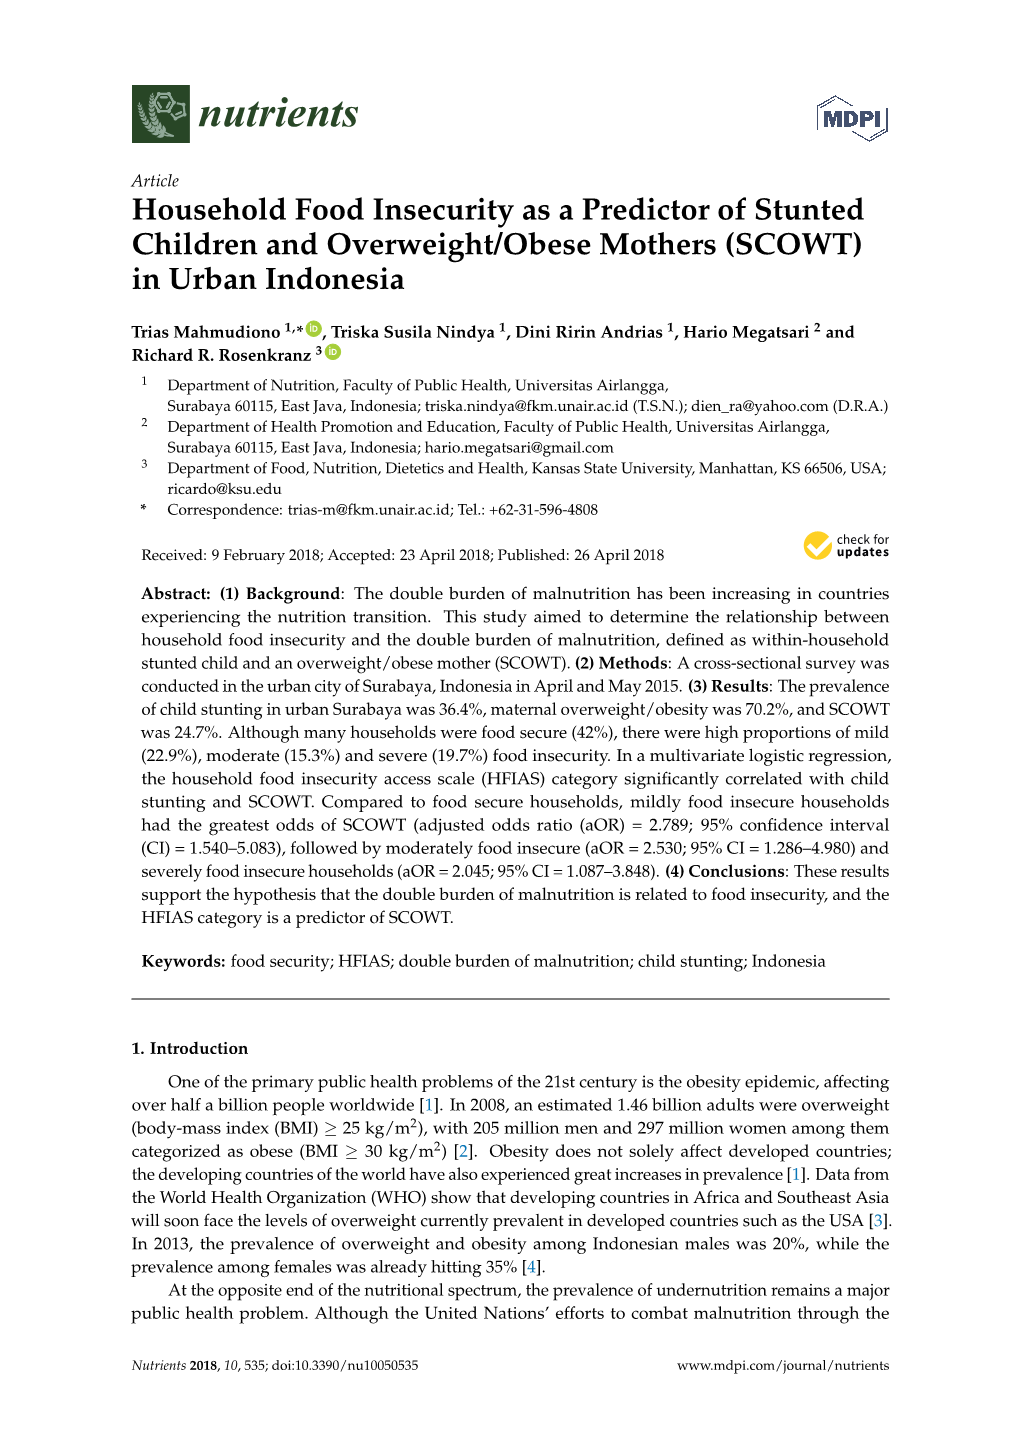 Household Food Insecurity As a Predictor of Stunted Children and Overweight/Obese Mothers (SCOWT) in Urban Indonesia